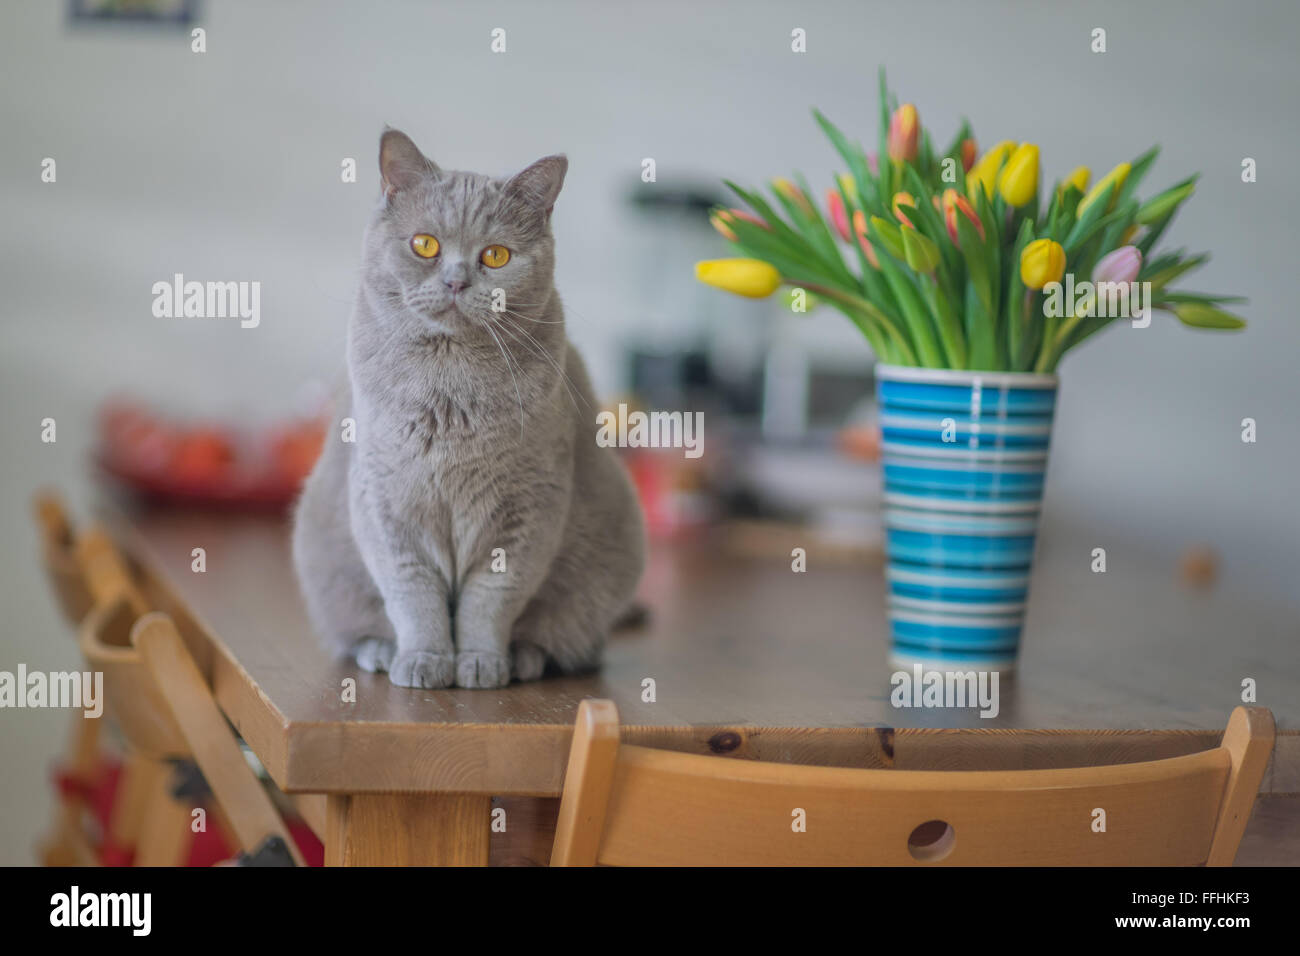 British lilac shorthair cat tomcat sitting on the table at the case bottle with bunch of multicolor spring tulips gazing staring Stock Photo